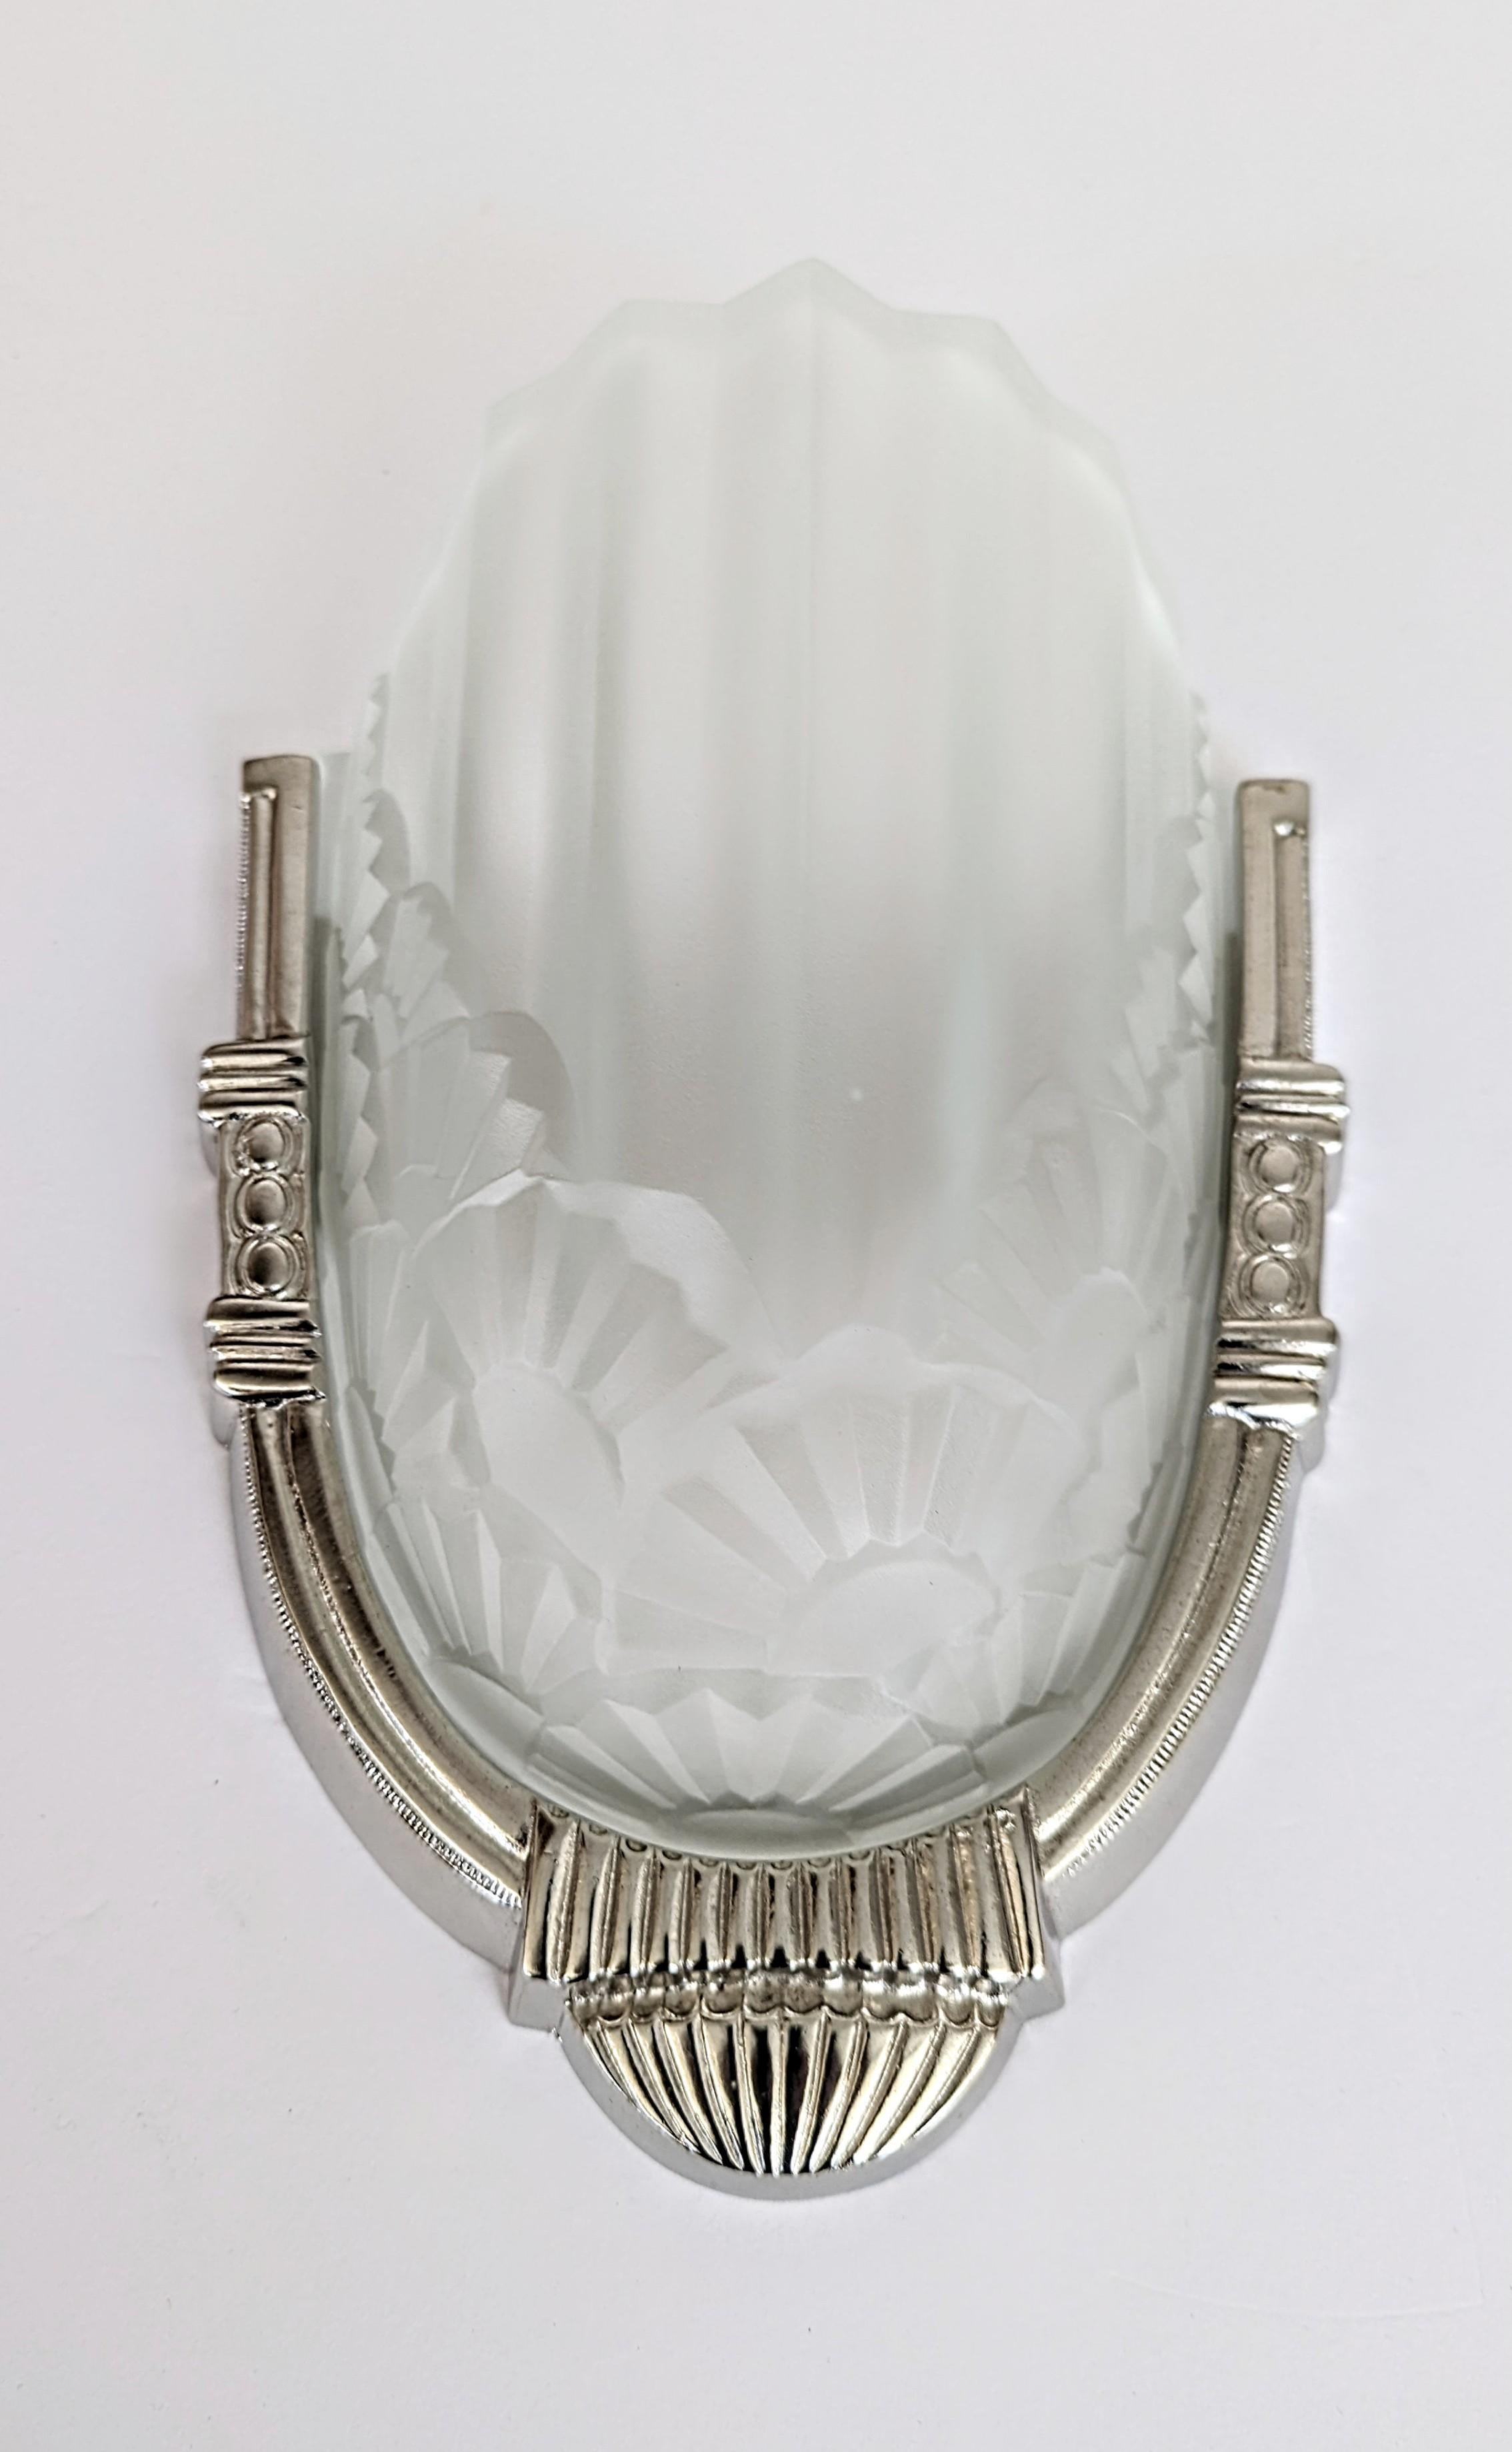 A pair of French Art Deco wall sconces by the French artist 